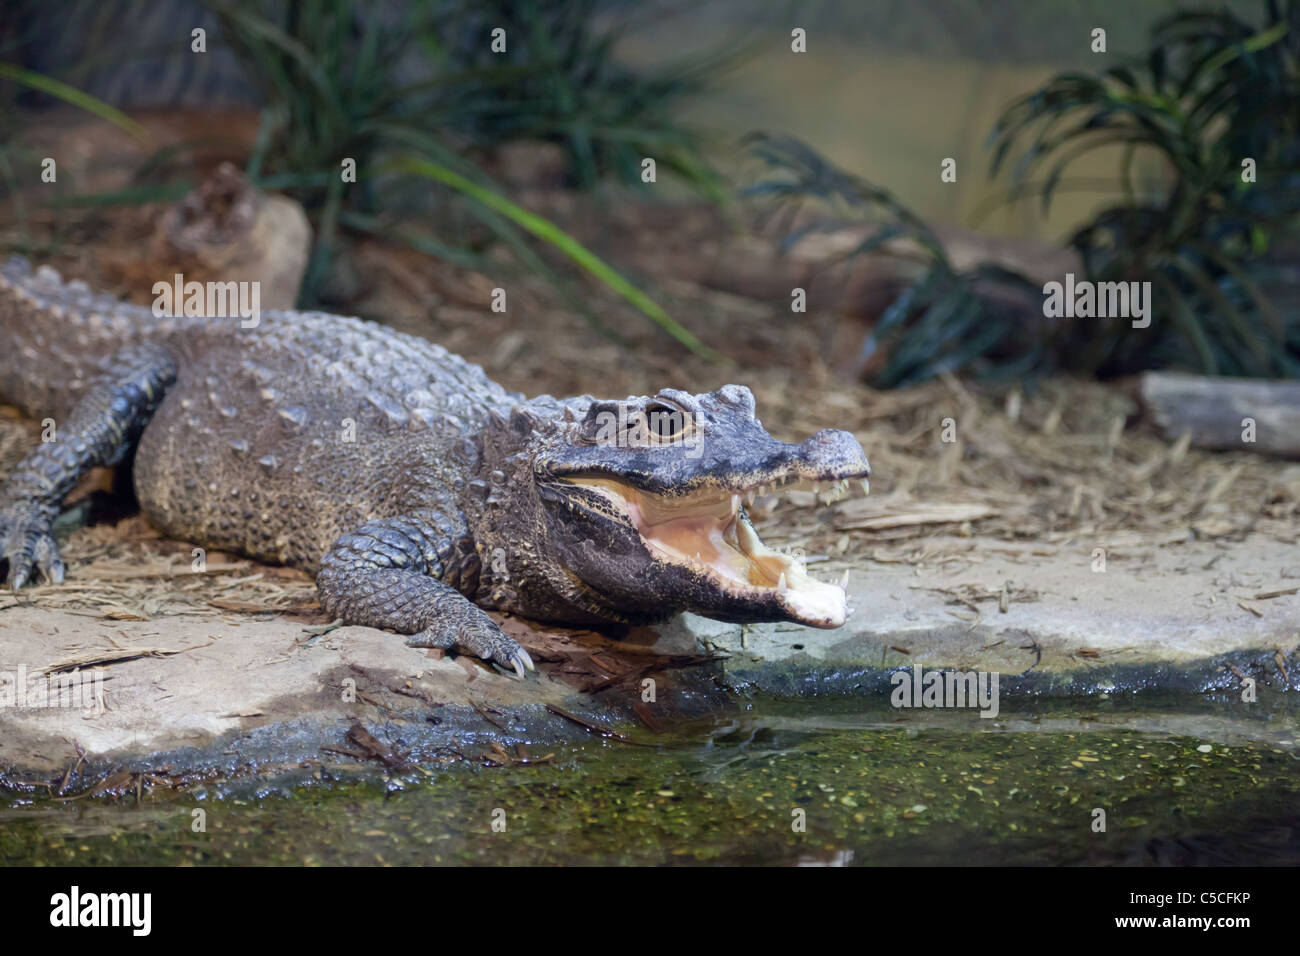 Small alligator with mouth open in a zoo exhibit Stock Photo